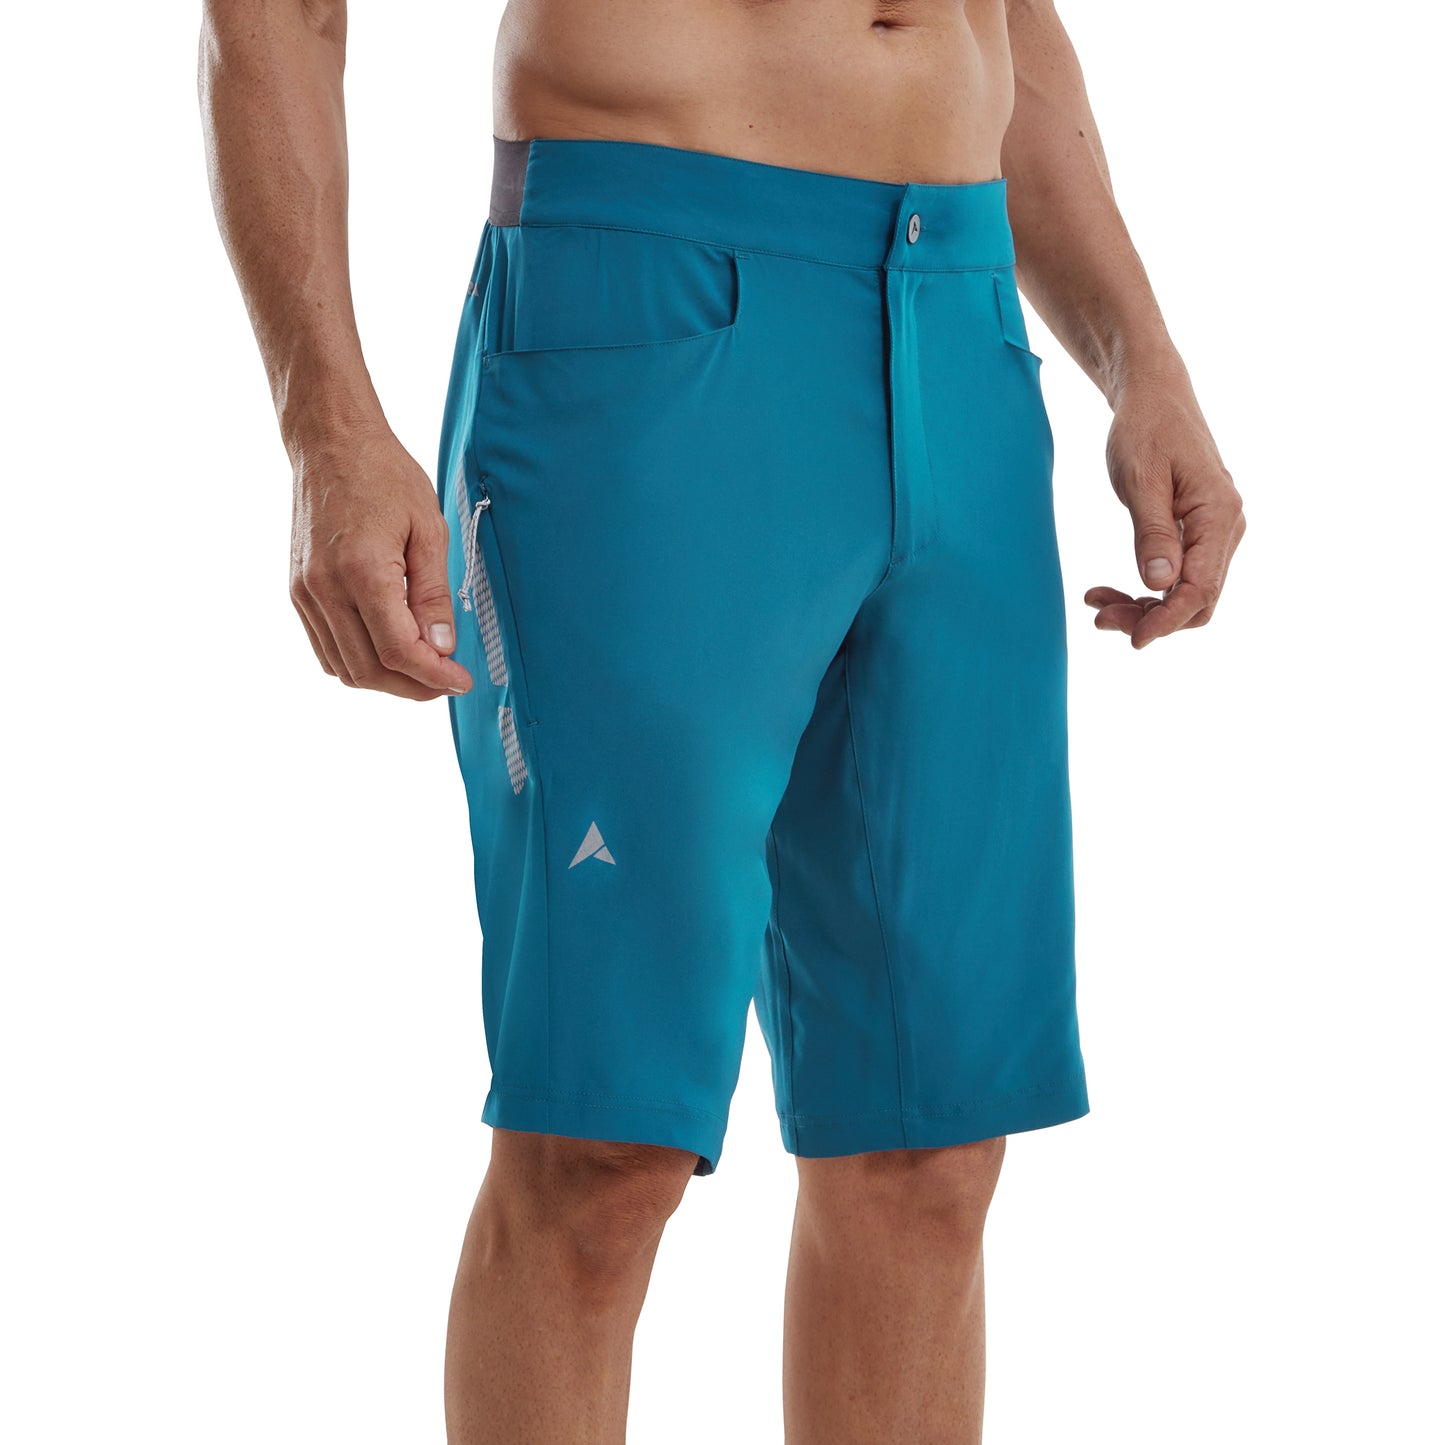 ALTURA NIGHTVISION MEN'S LightWEIGHT CYCLING SHORTS